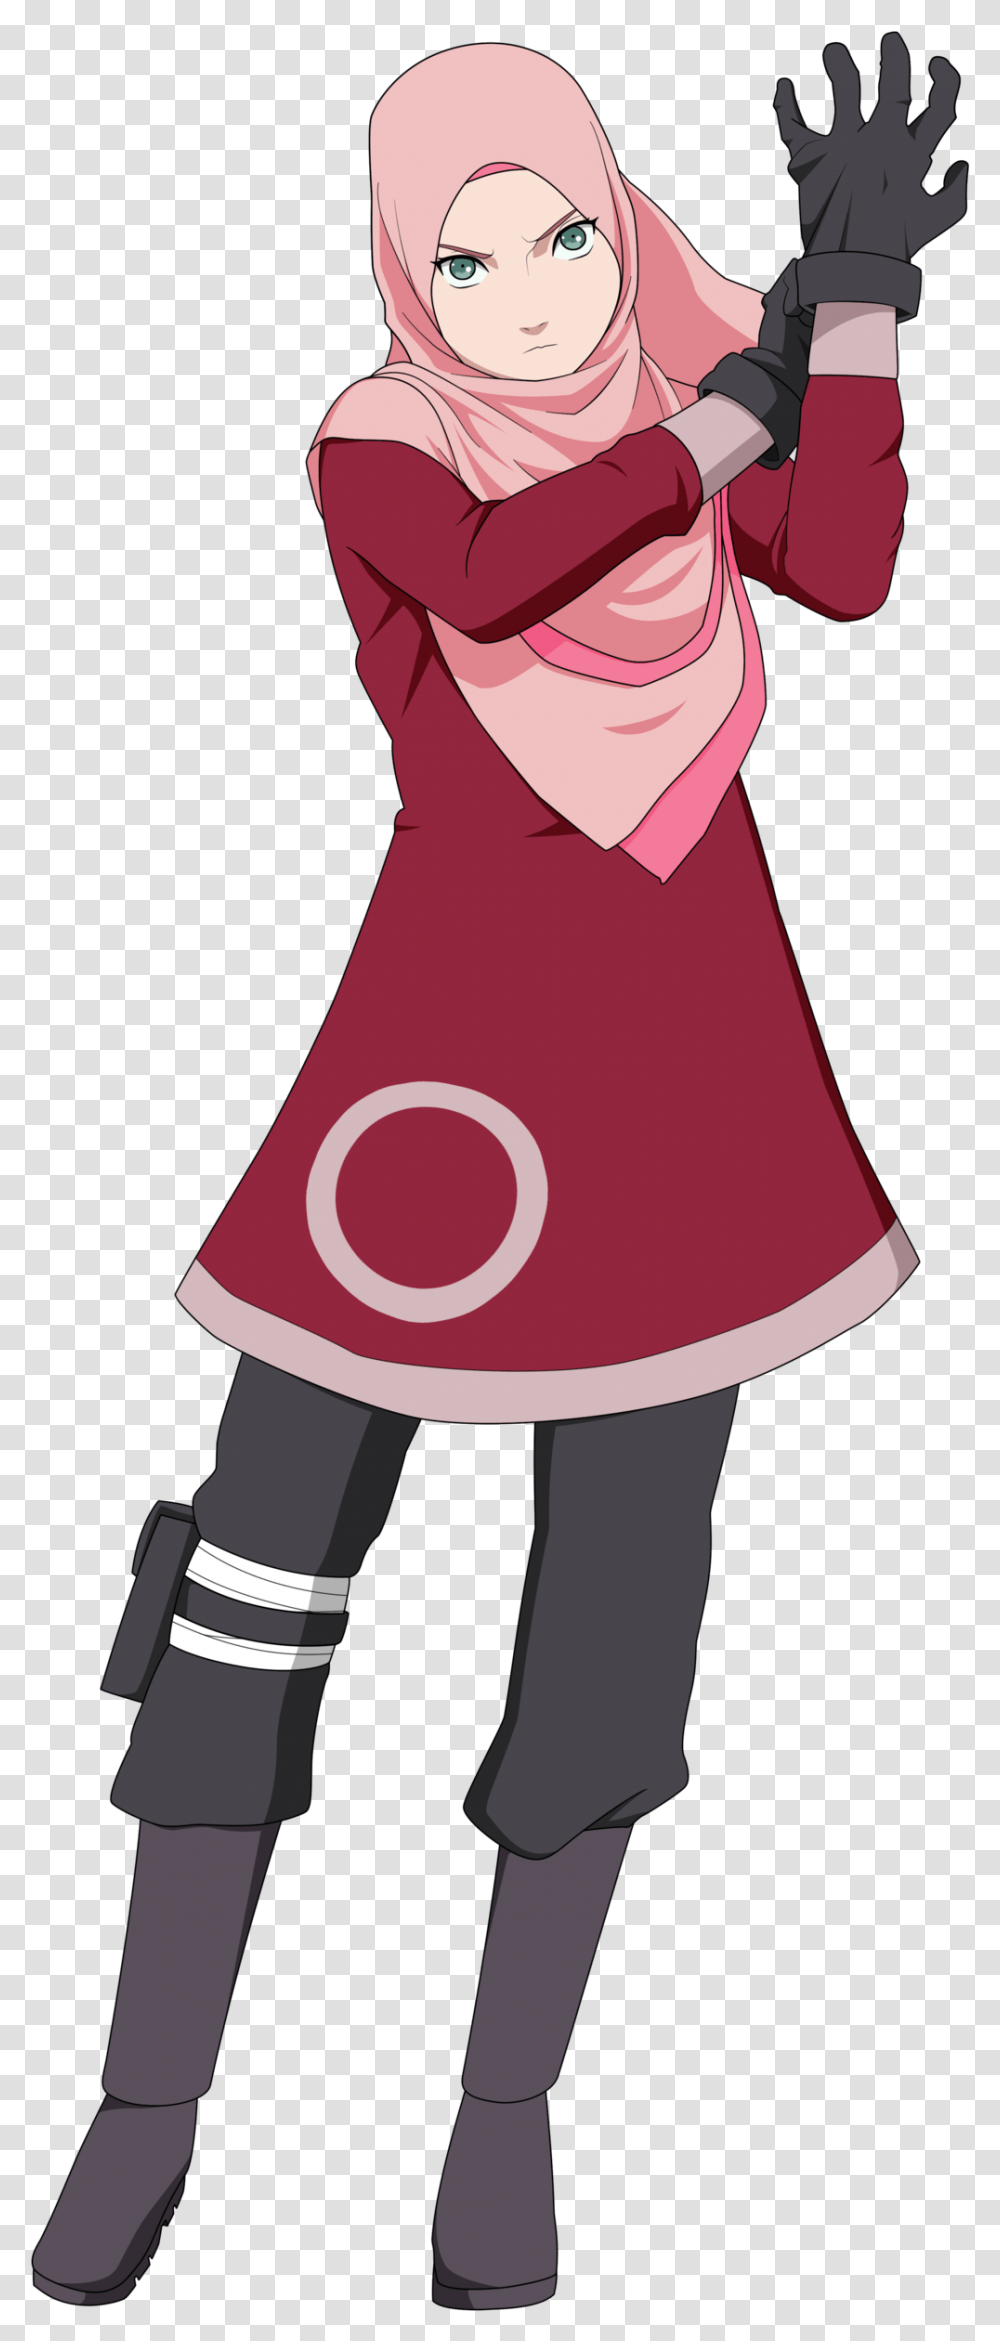 Download For Any Of My Muslim Friends Who Like Naruto Sakura Haruno Hijab, Clothing, Apparel, Person, Dress Transparent Png